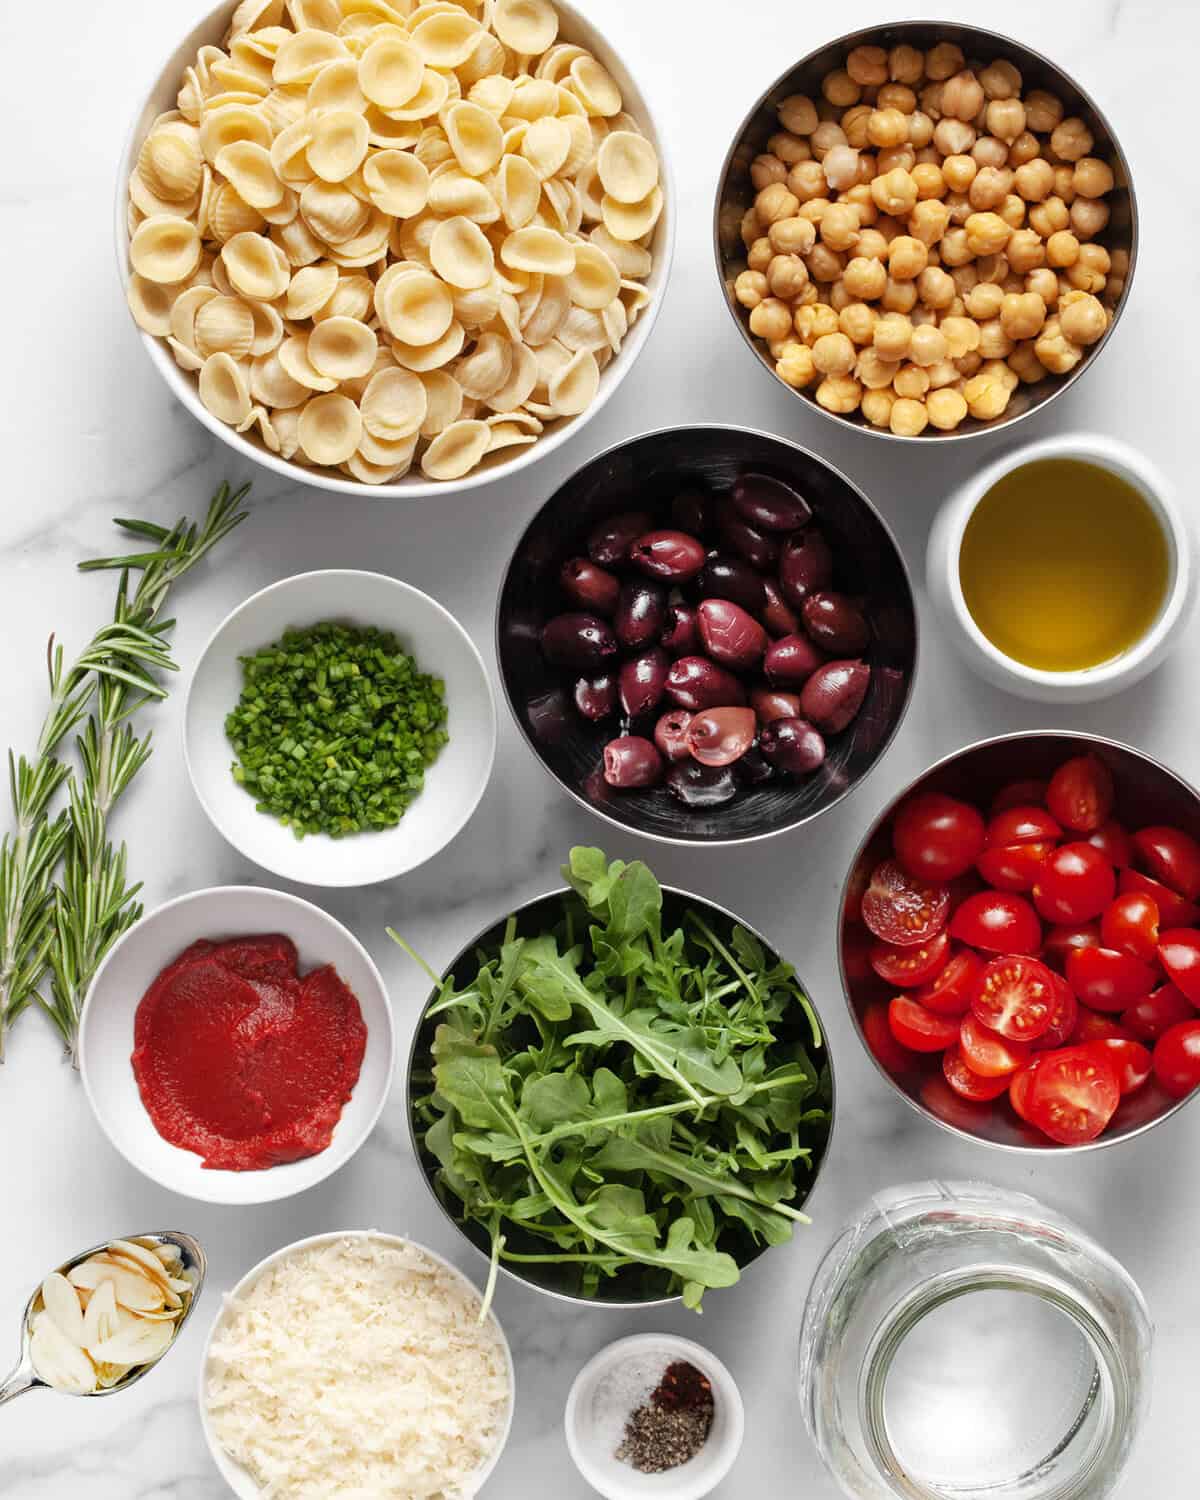 Ingredients including orecchiette, chickpeas, olives, tomatoes, arugula, parmesan, tomato pasta, garlic and water.